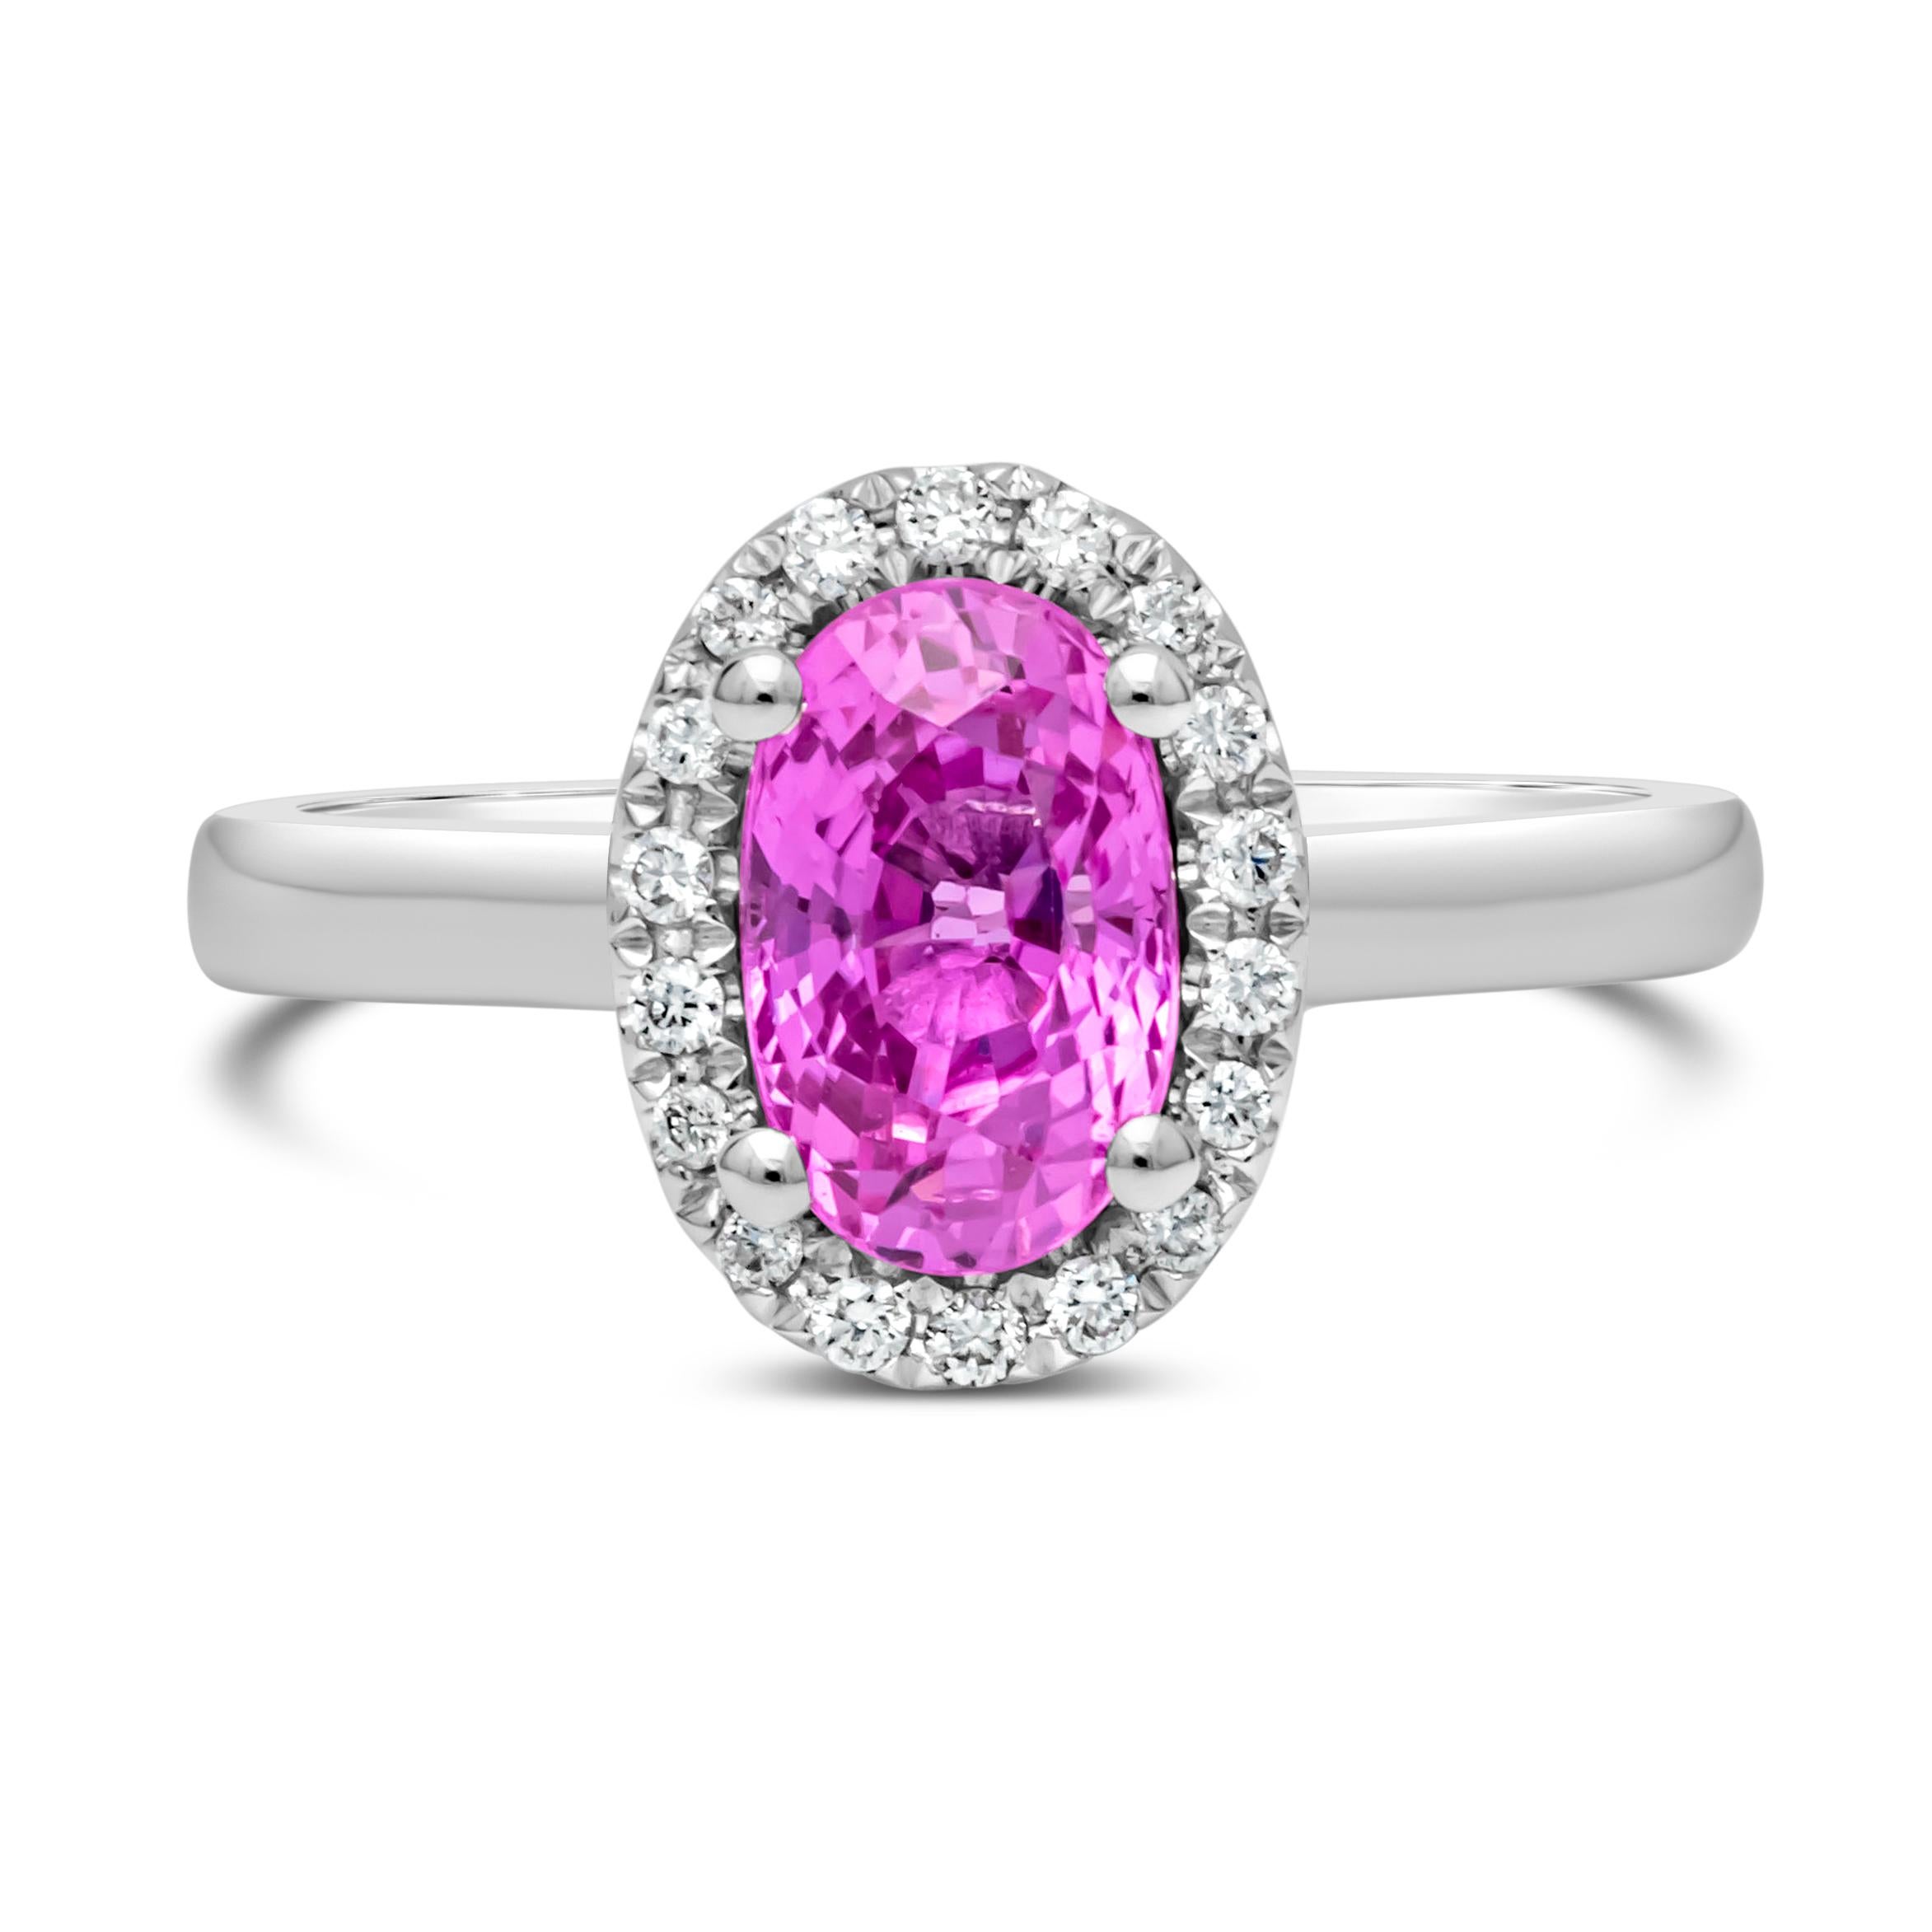 This versatile and beautiful halo engagement ring style showcasing an oval cut pink sapphire weighing 1.95 carats total, set in a classic four prong basket setting. Elegantly surrounded by a row of 32 brilliant round diamonds weighing 0.22 carats